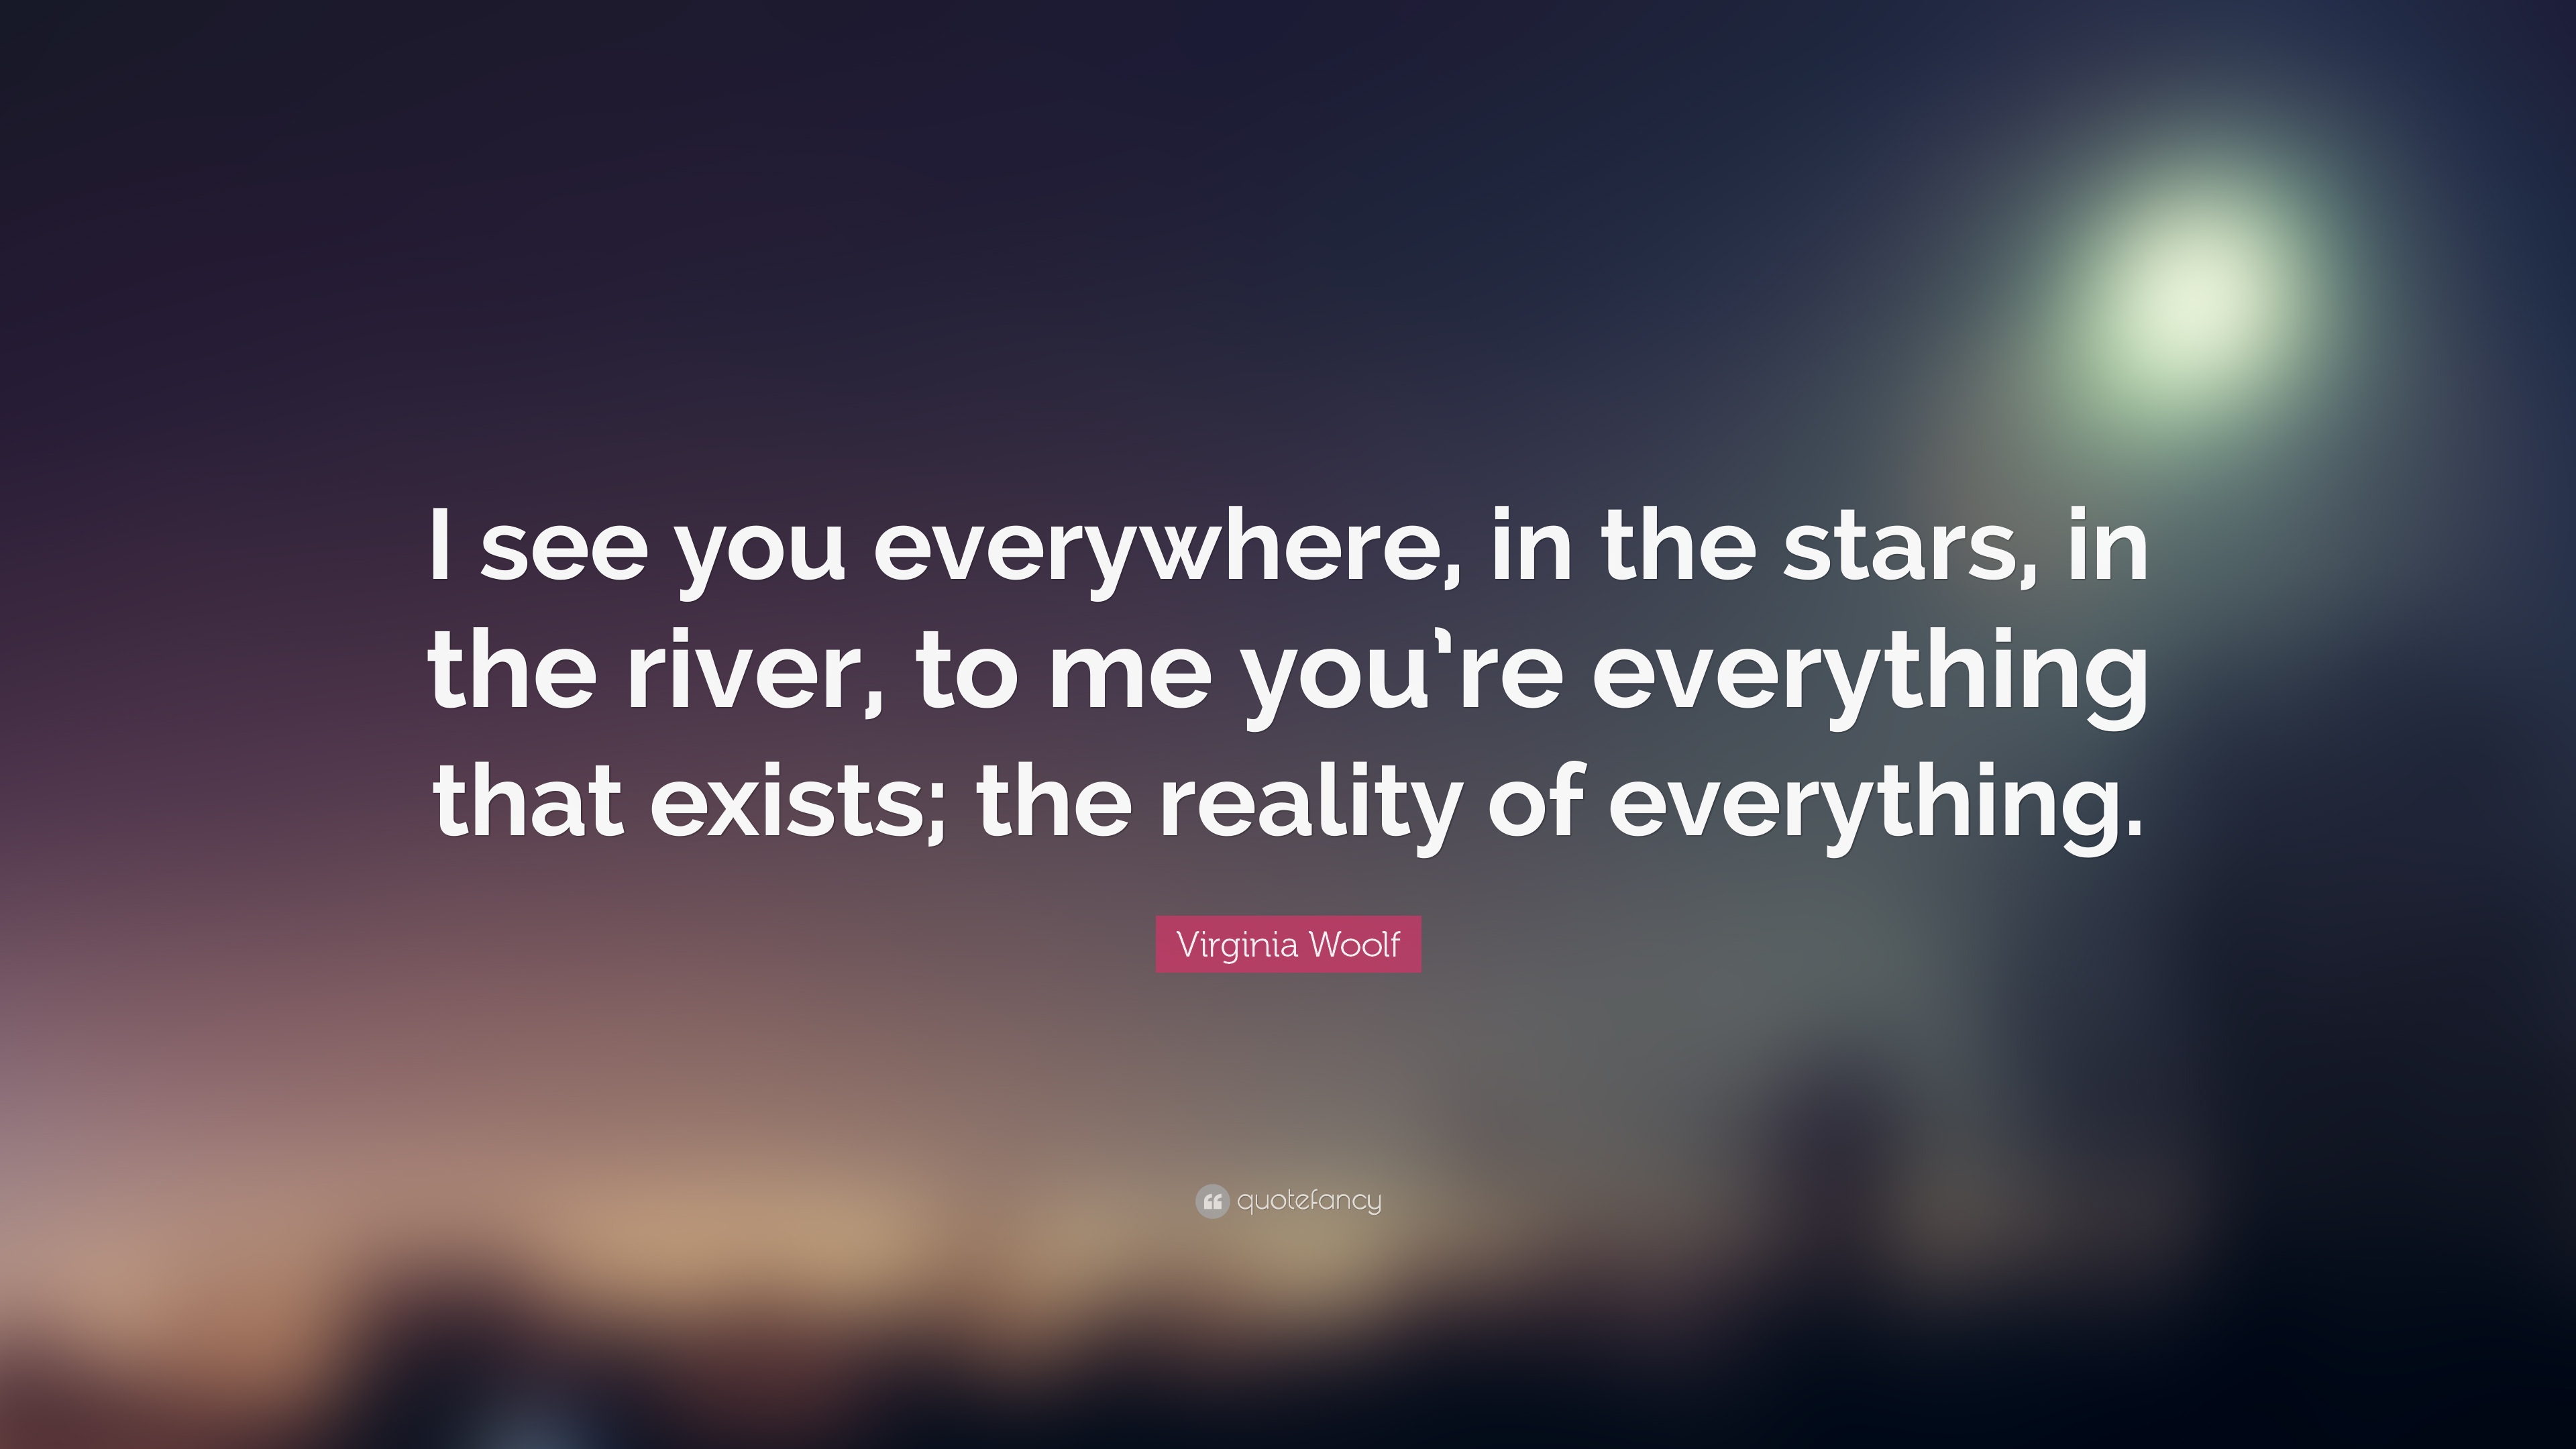 Virginia Woolf Quote: “I see you everywhere, in the stars, in the ...